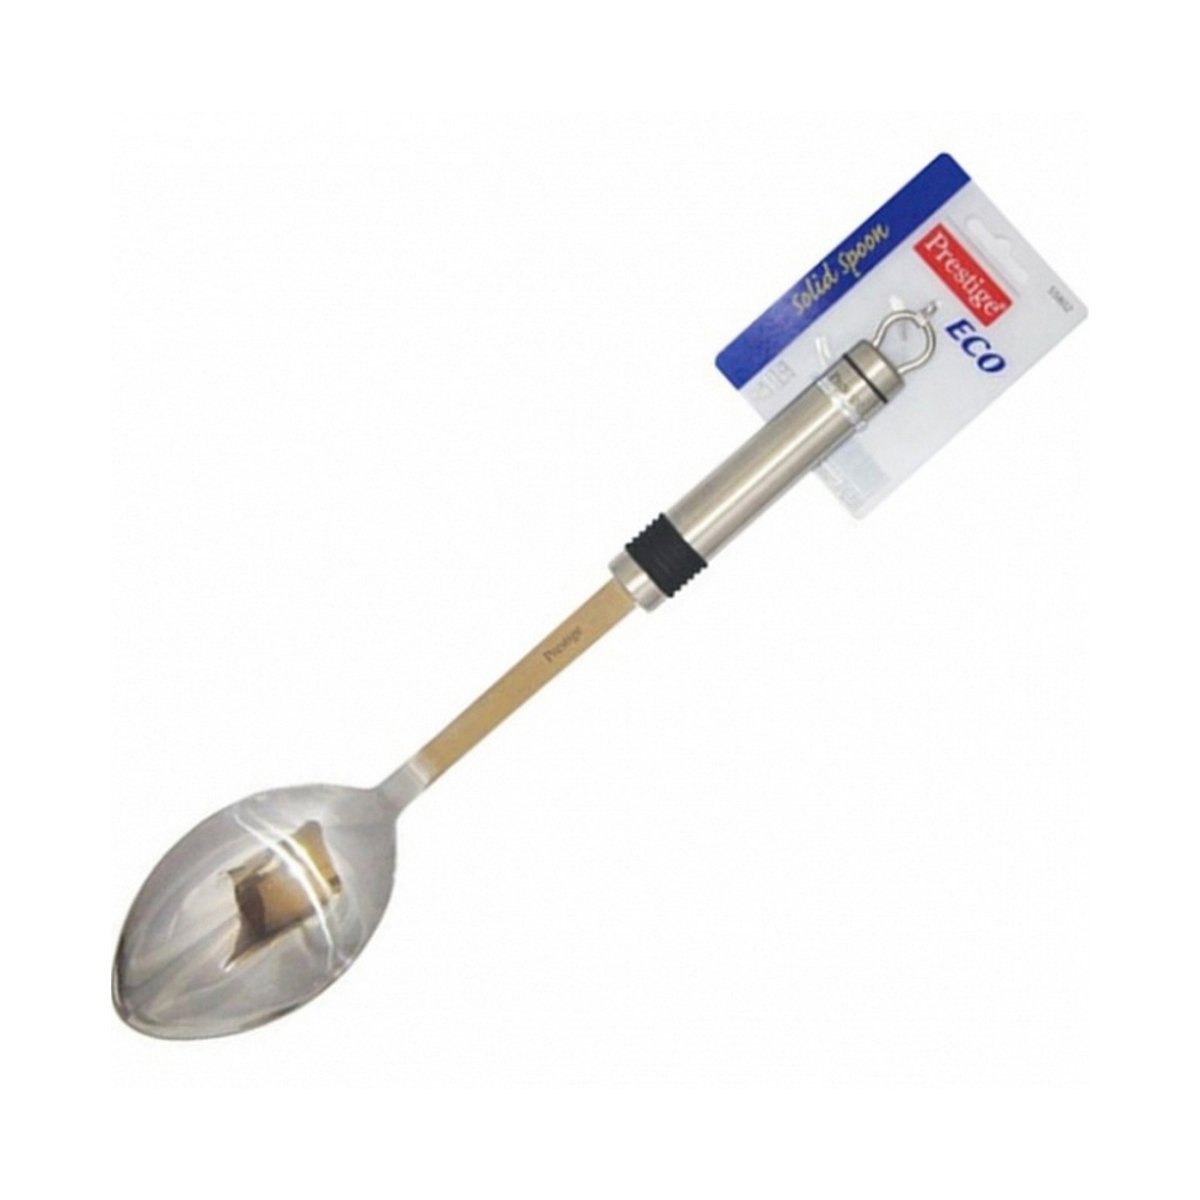 Prestige Eco Slotted Spoon Stainless Steel  55802